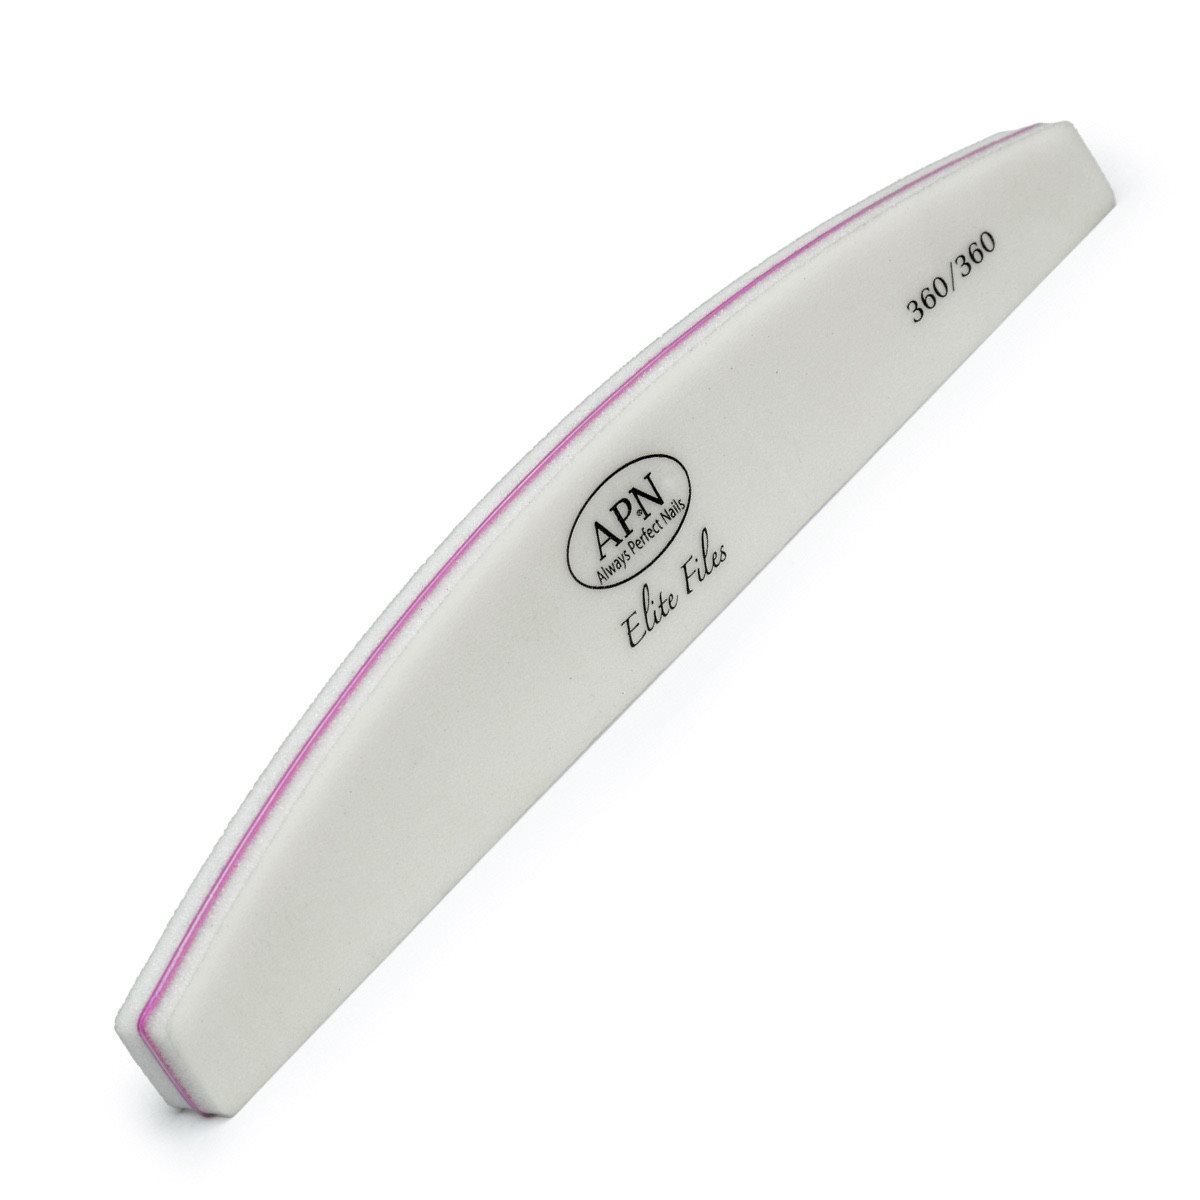 White Buffer with Pink Sponge 360 | Removes Gel Buildup - Professional Nail Smoothing Tool - beautyhair.co.ukChroma Gel